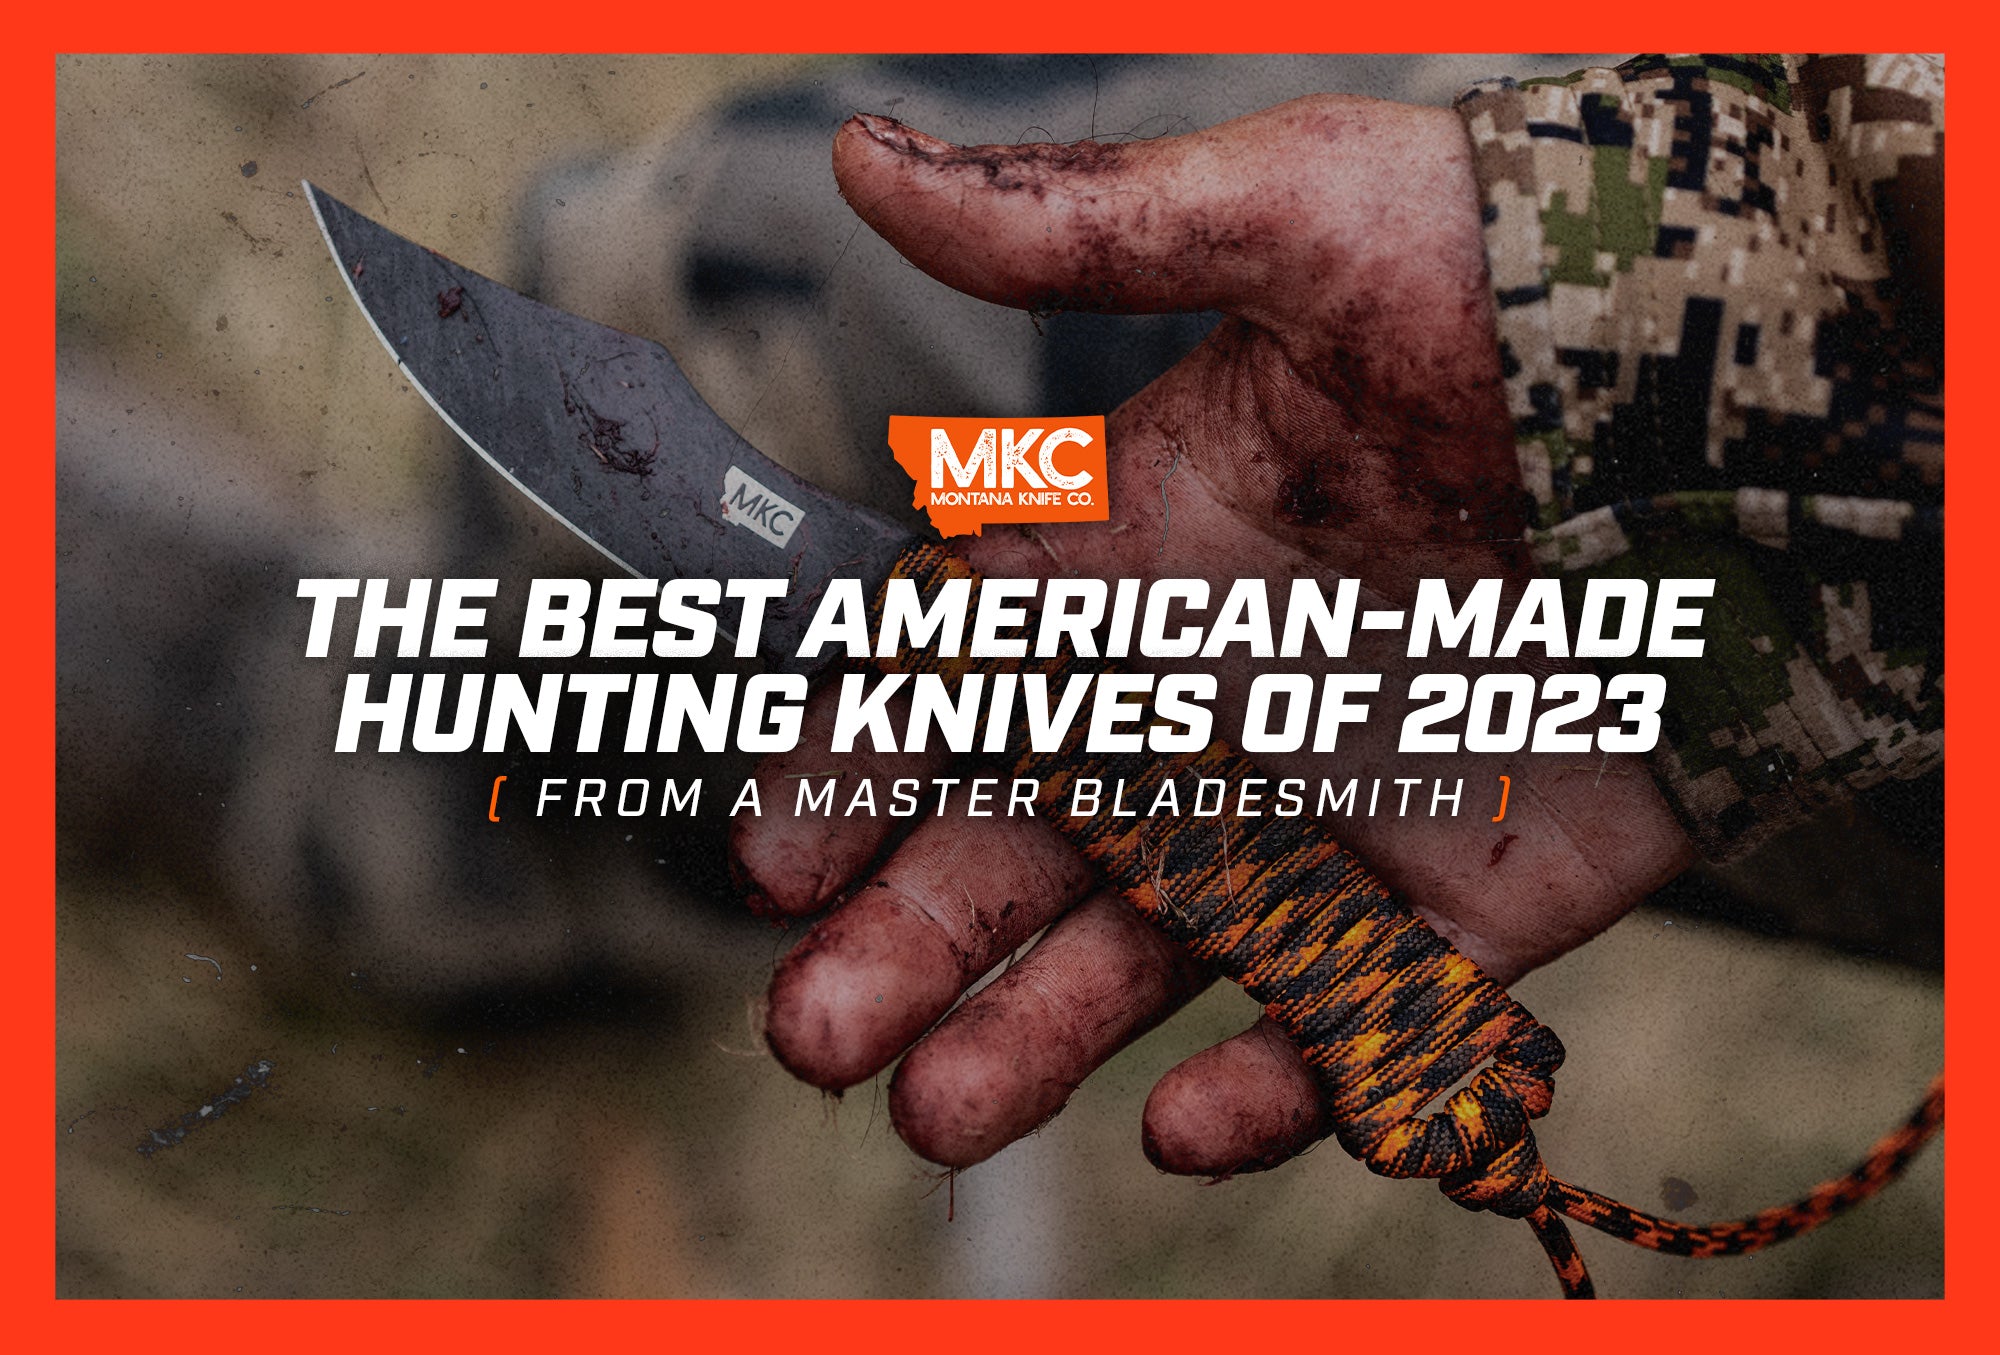 A bloody hand holds an MKC knife, representing a discussion about the best small-batch hunting knives on the market.